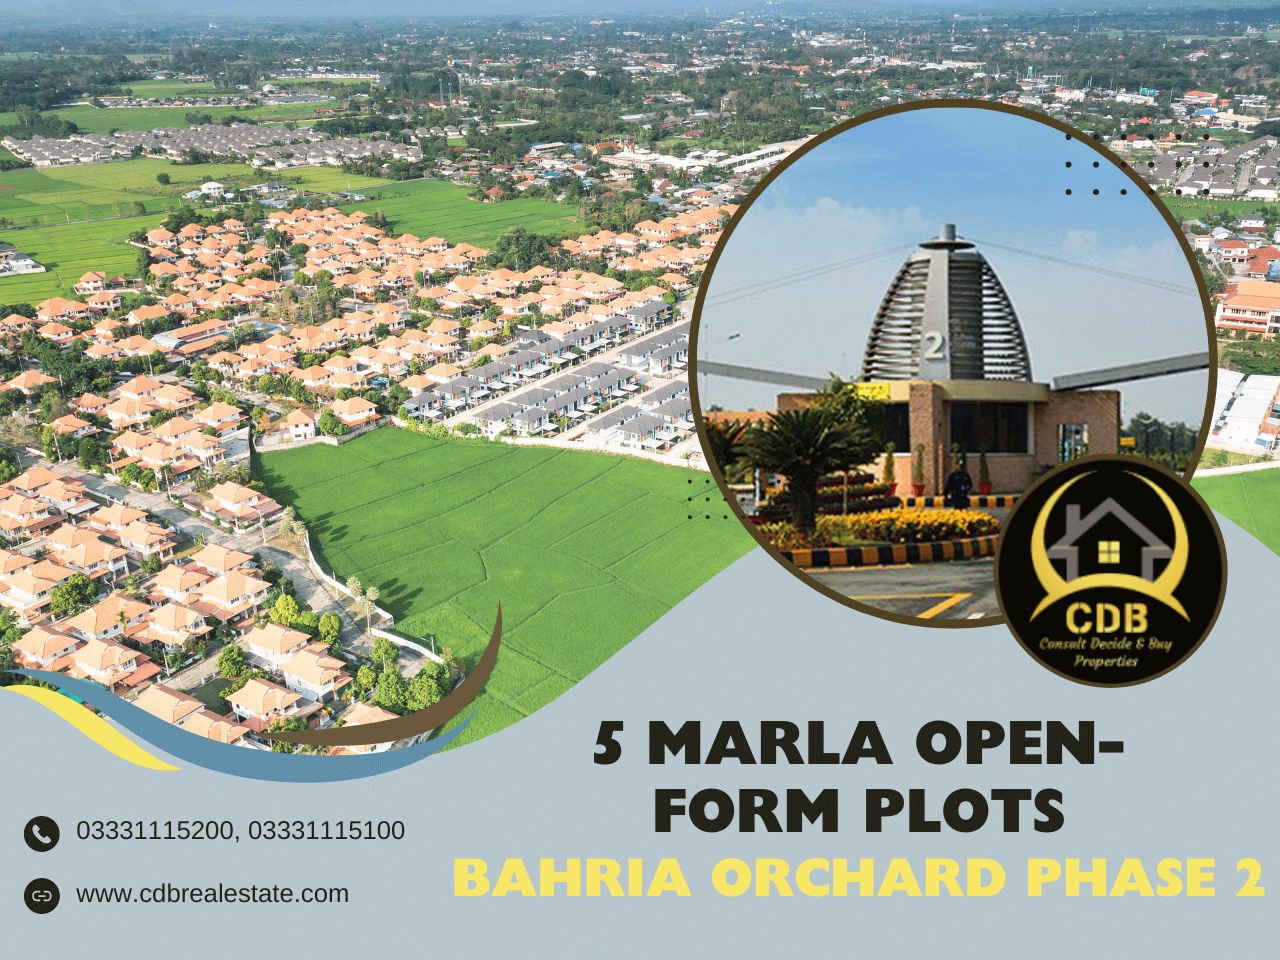 5 Marla Open-Form Plots in Bahria Orchard Phase 2